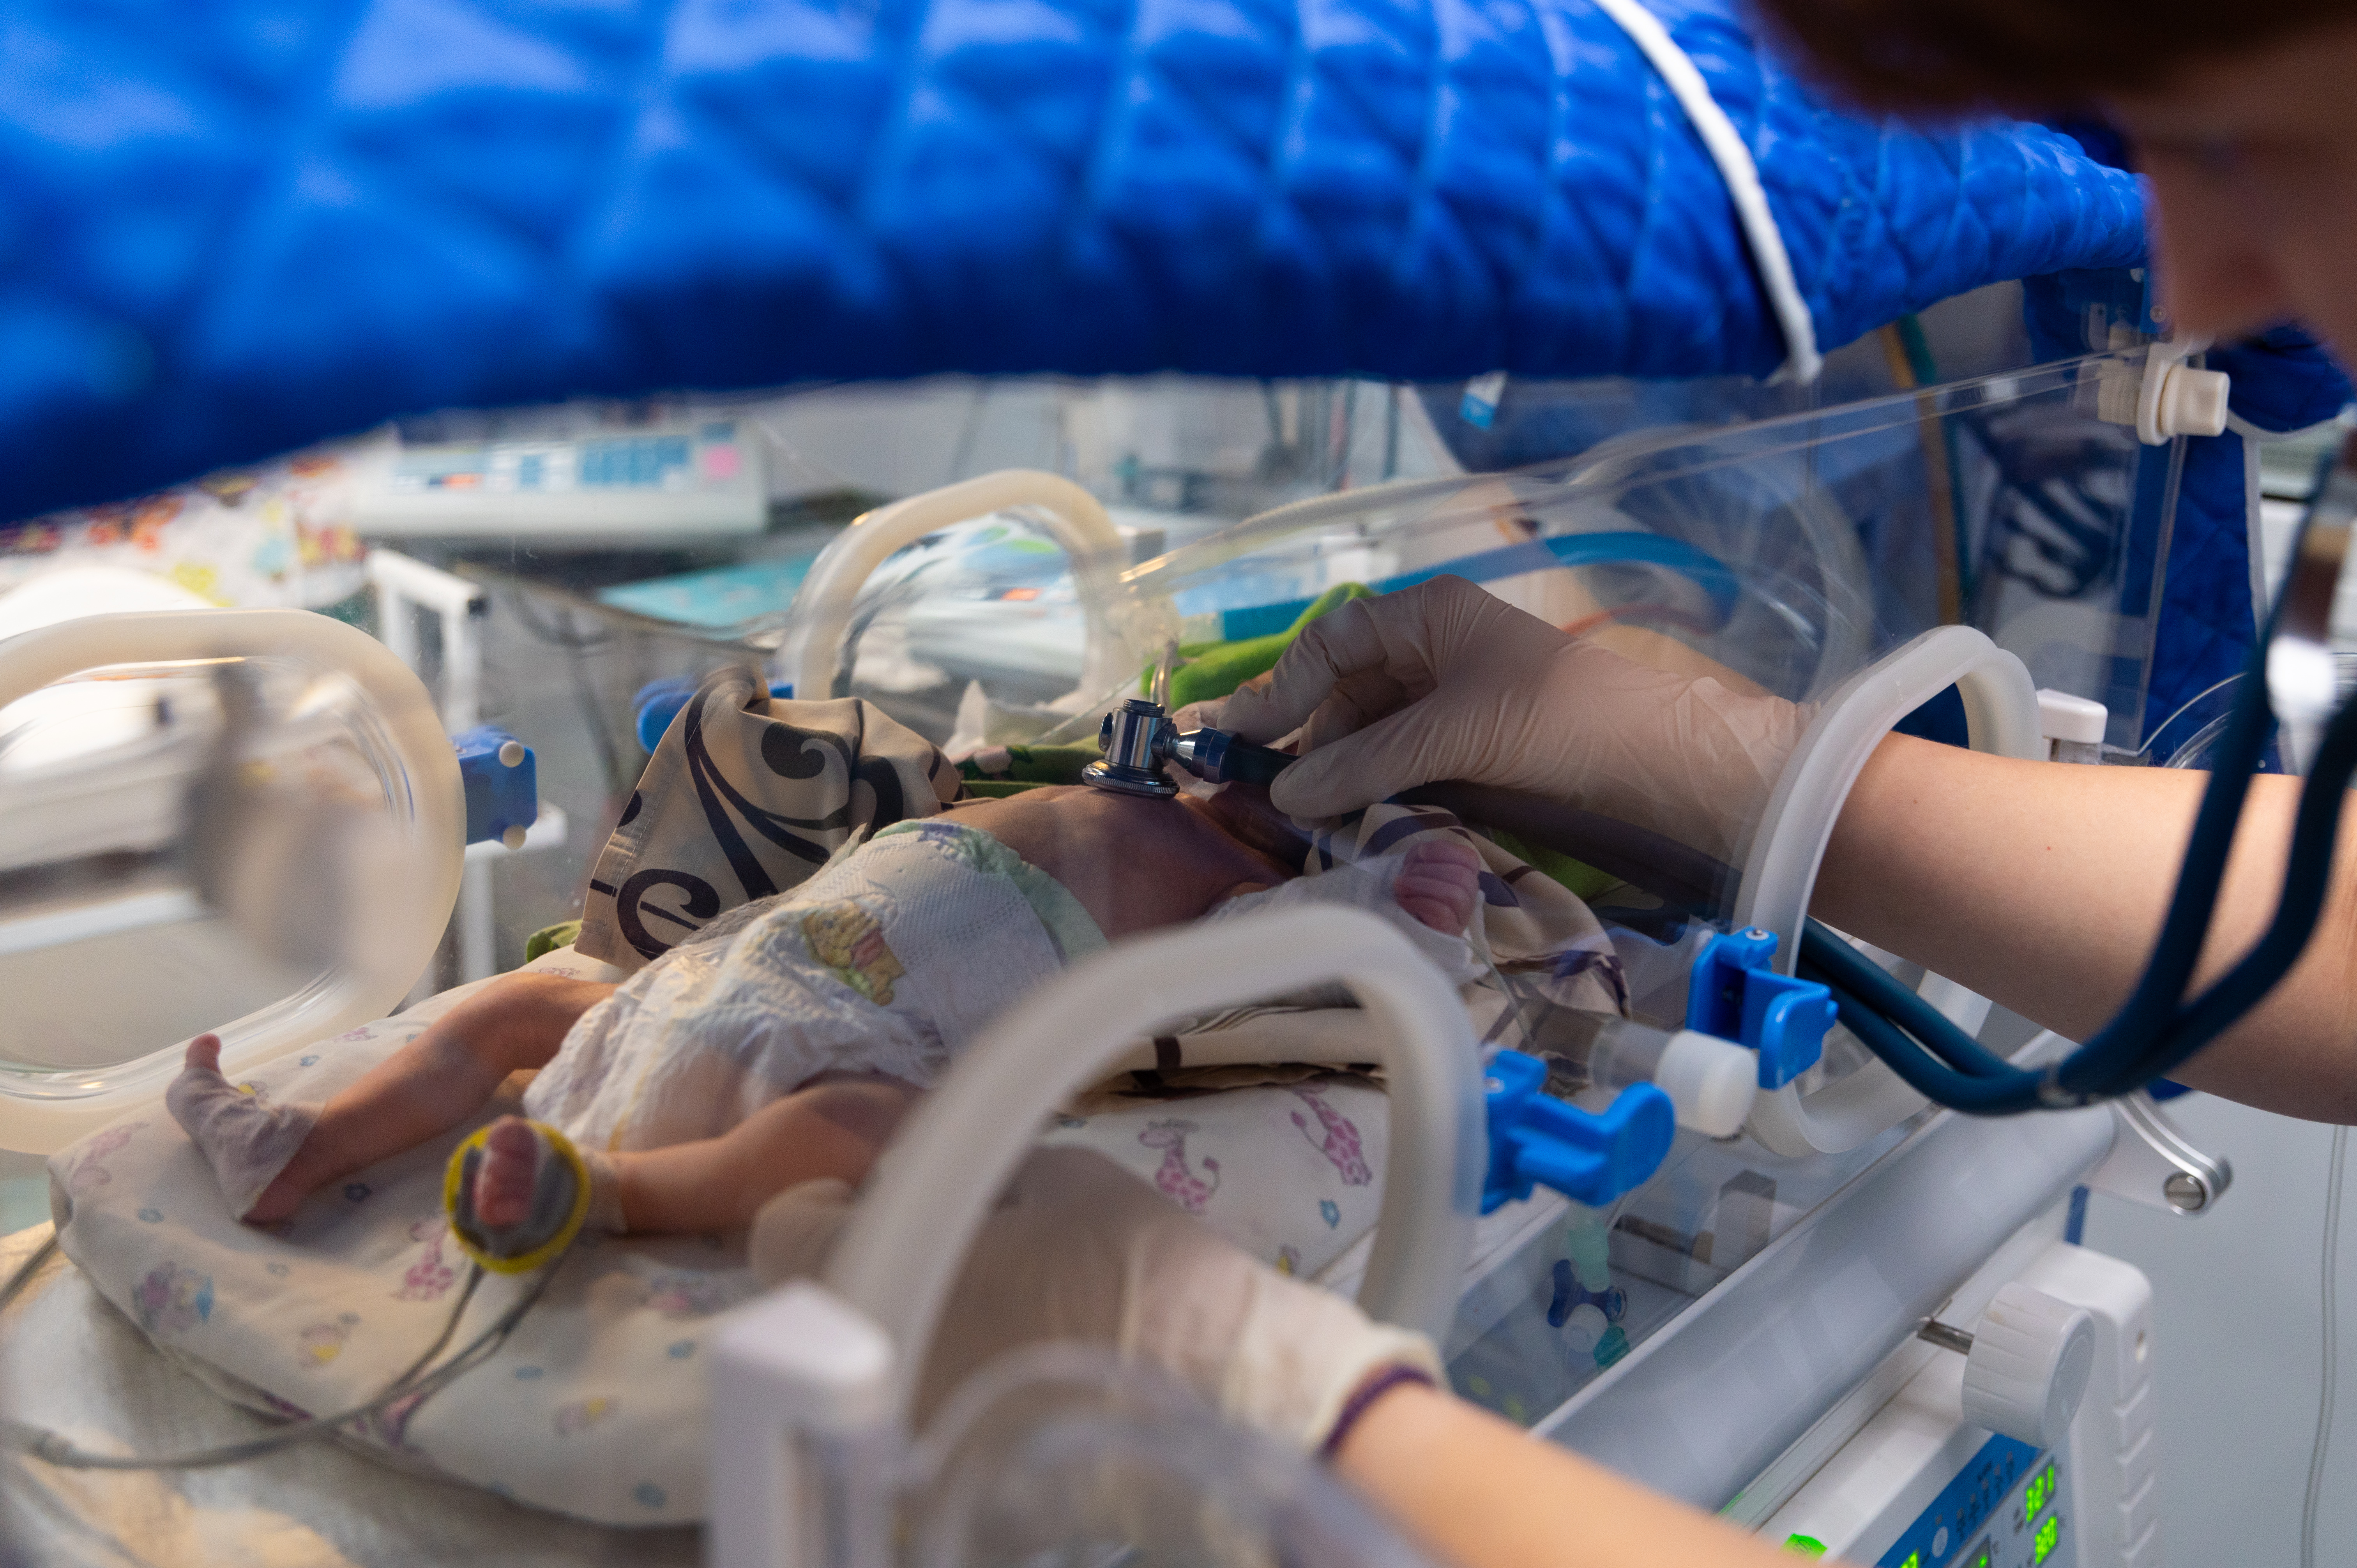 A baby receives care in an incubator